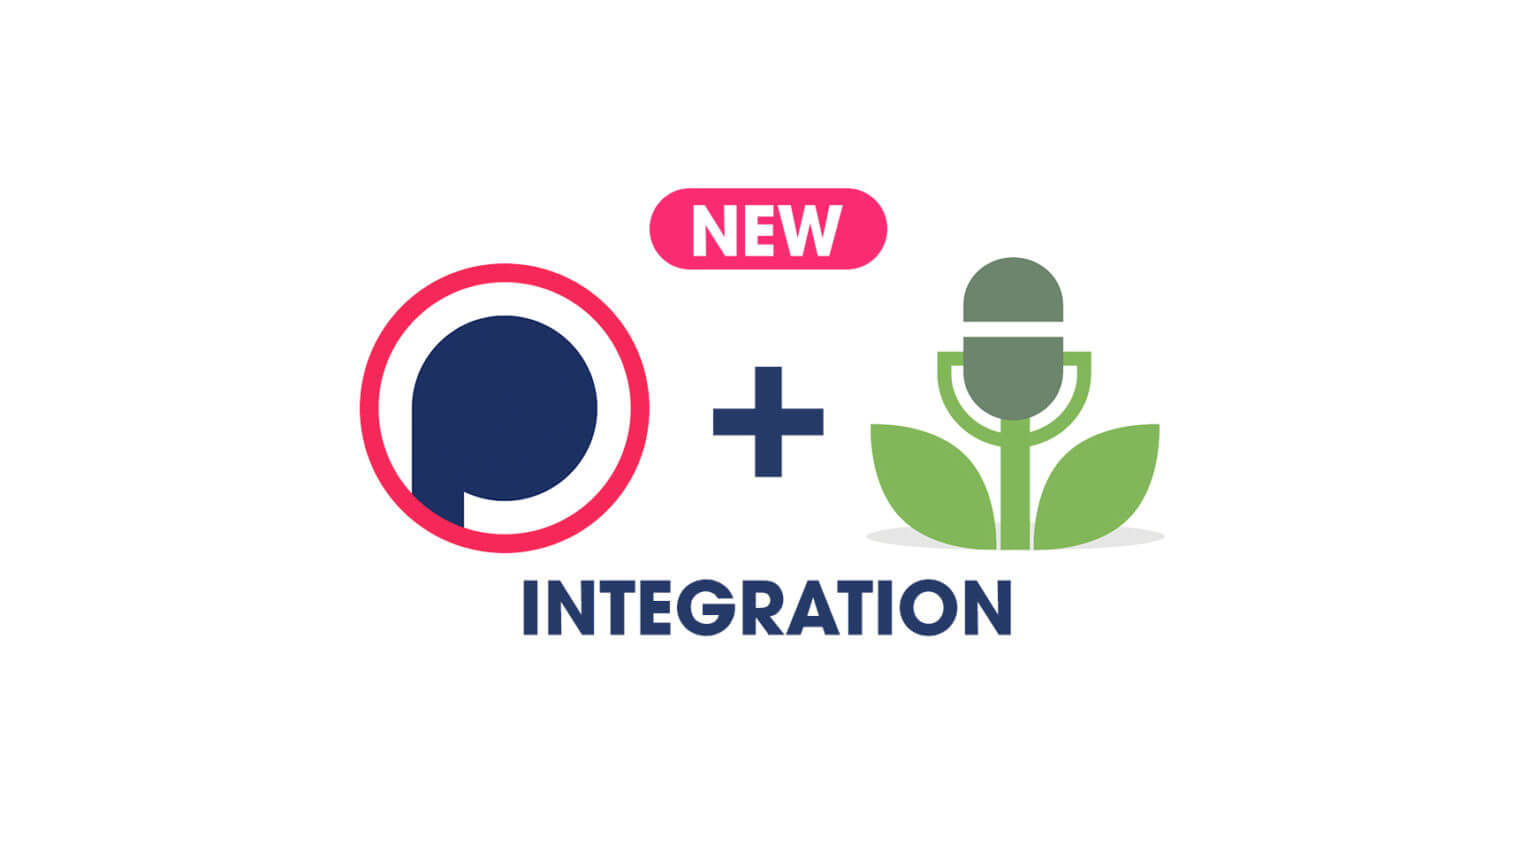 New Podchaser-Buzzsprout Integration Helps Podcasters Boost Discoverability